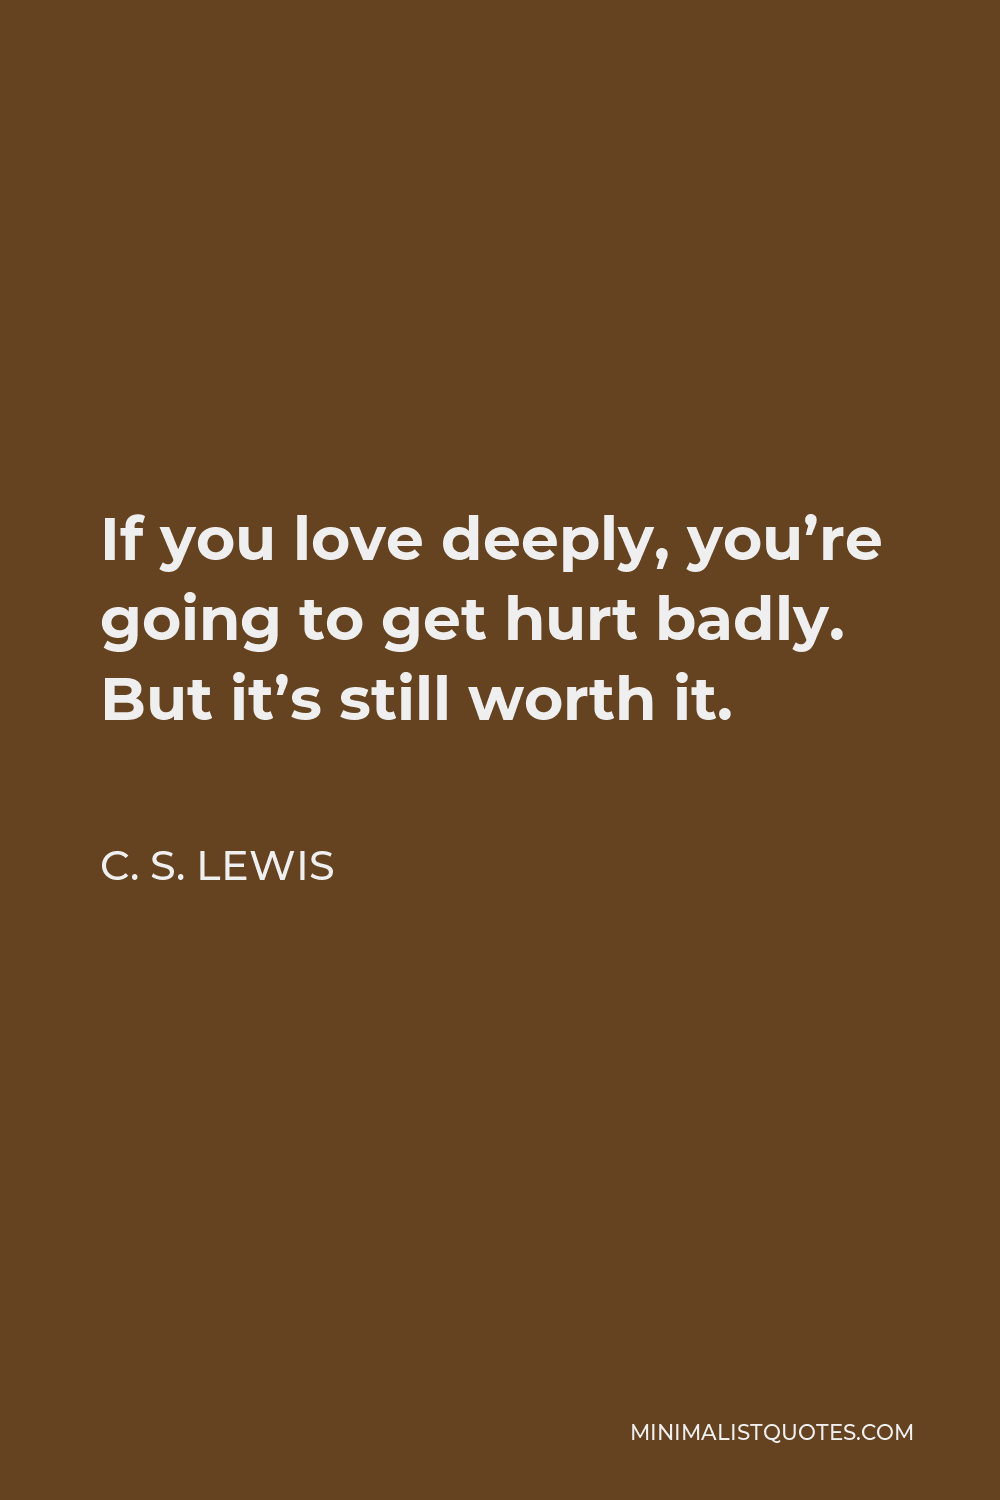 C. S. Lewis Quote - If you love deeply, you’re going to get hurt badly. But it’s still worth it.